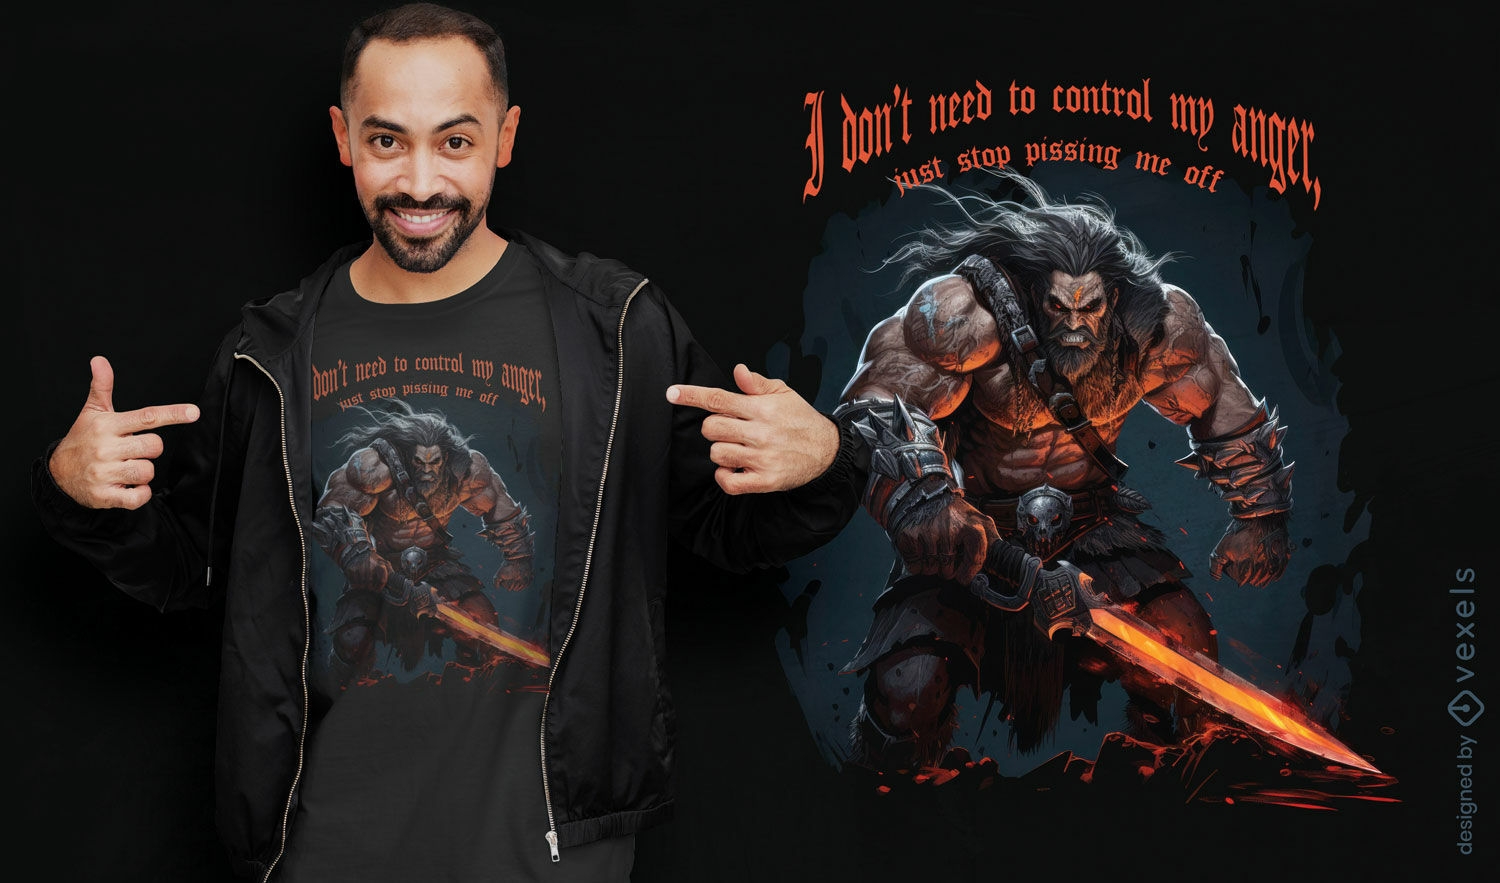 Barbarian with sword quote t-shirt design